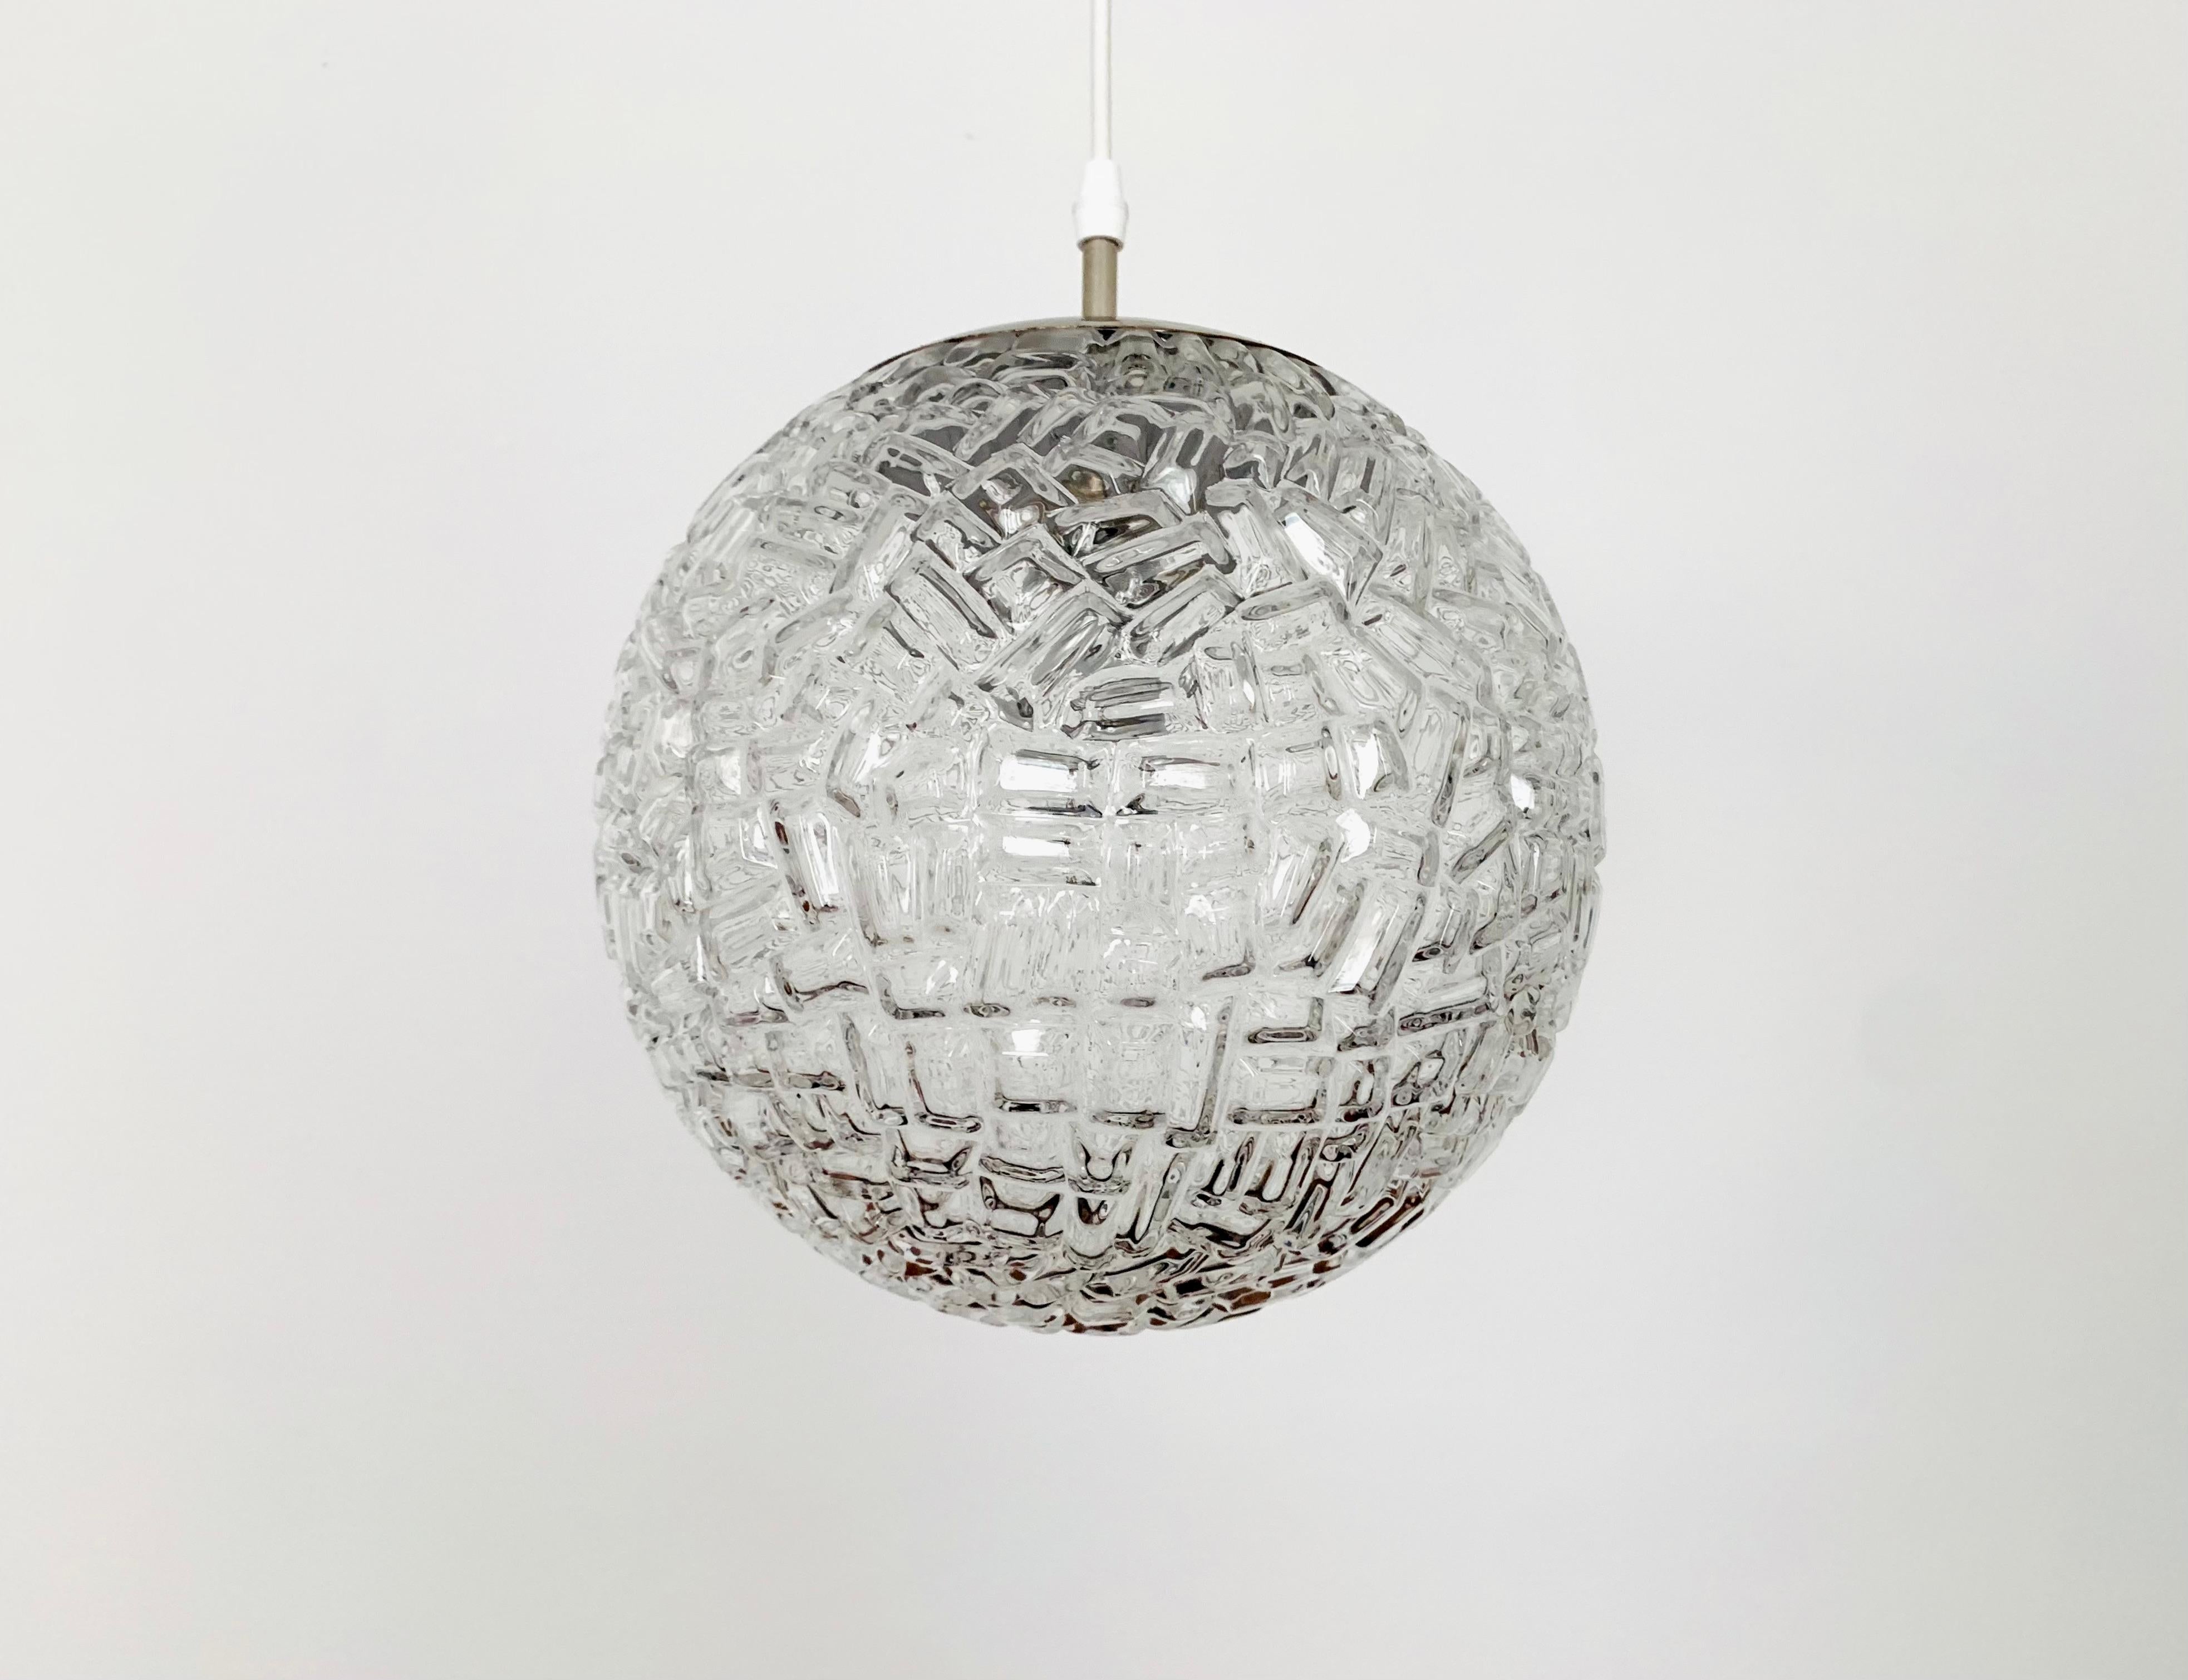 Wonderful glass pendant lamp from the 1950s.
Extremely beautiful design with a wonderful pattern.
A sparkling play of light is created in the room.

Manufacturer: Peill and Putzler
Design: Aloys Gangkofner

Condition:

Very good vintage condition